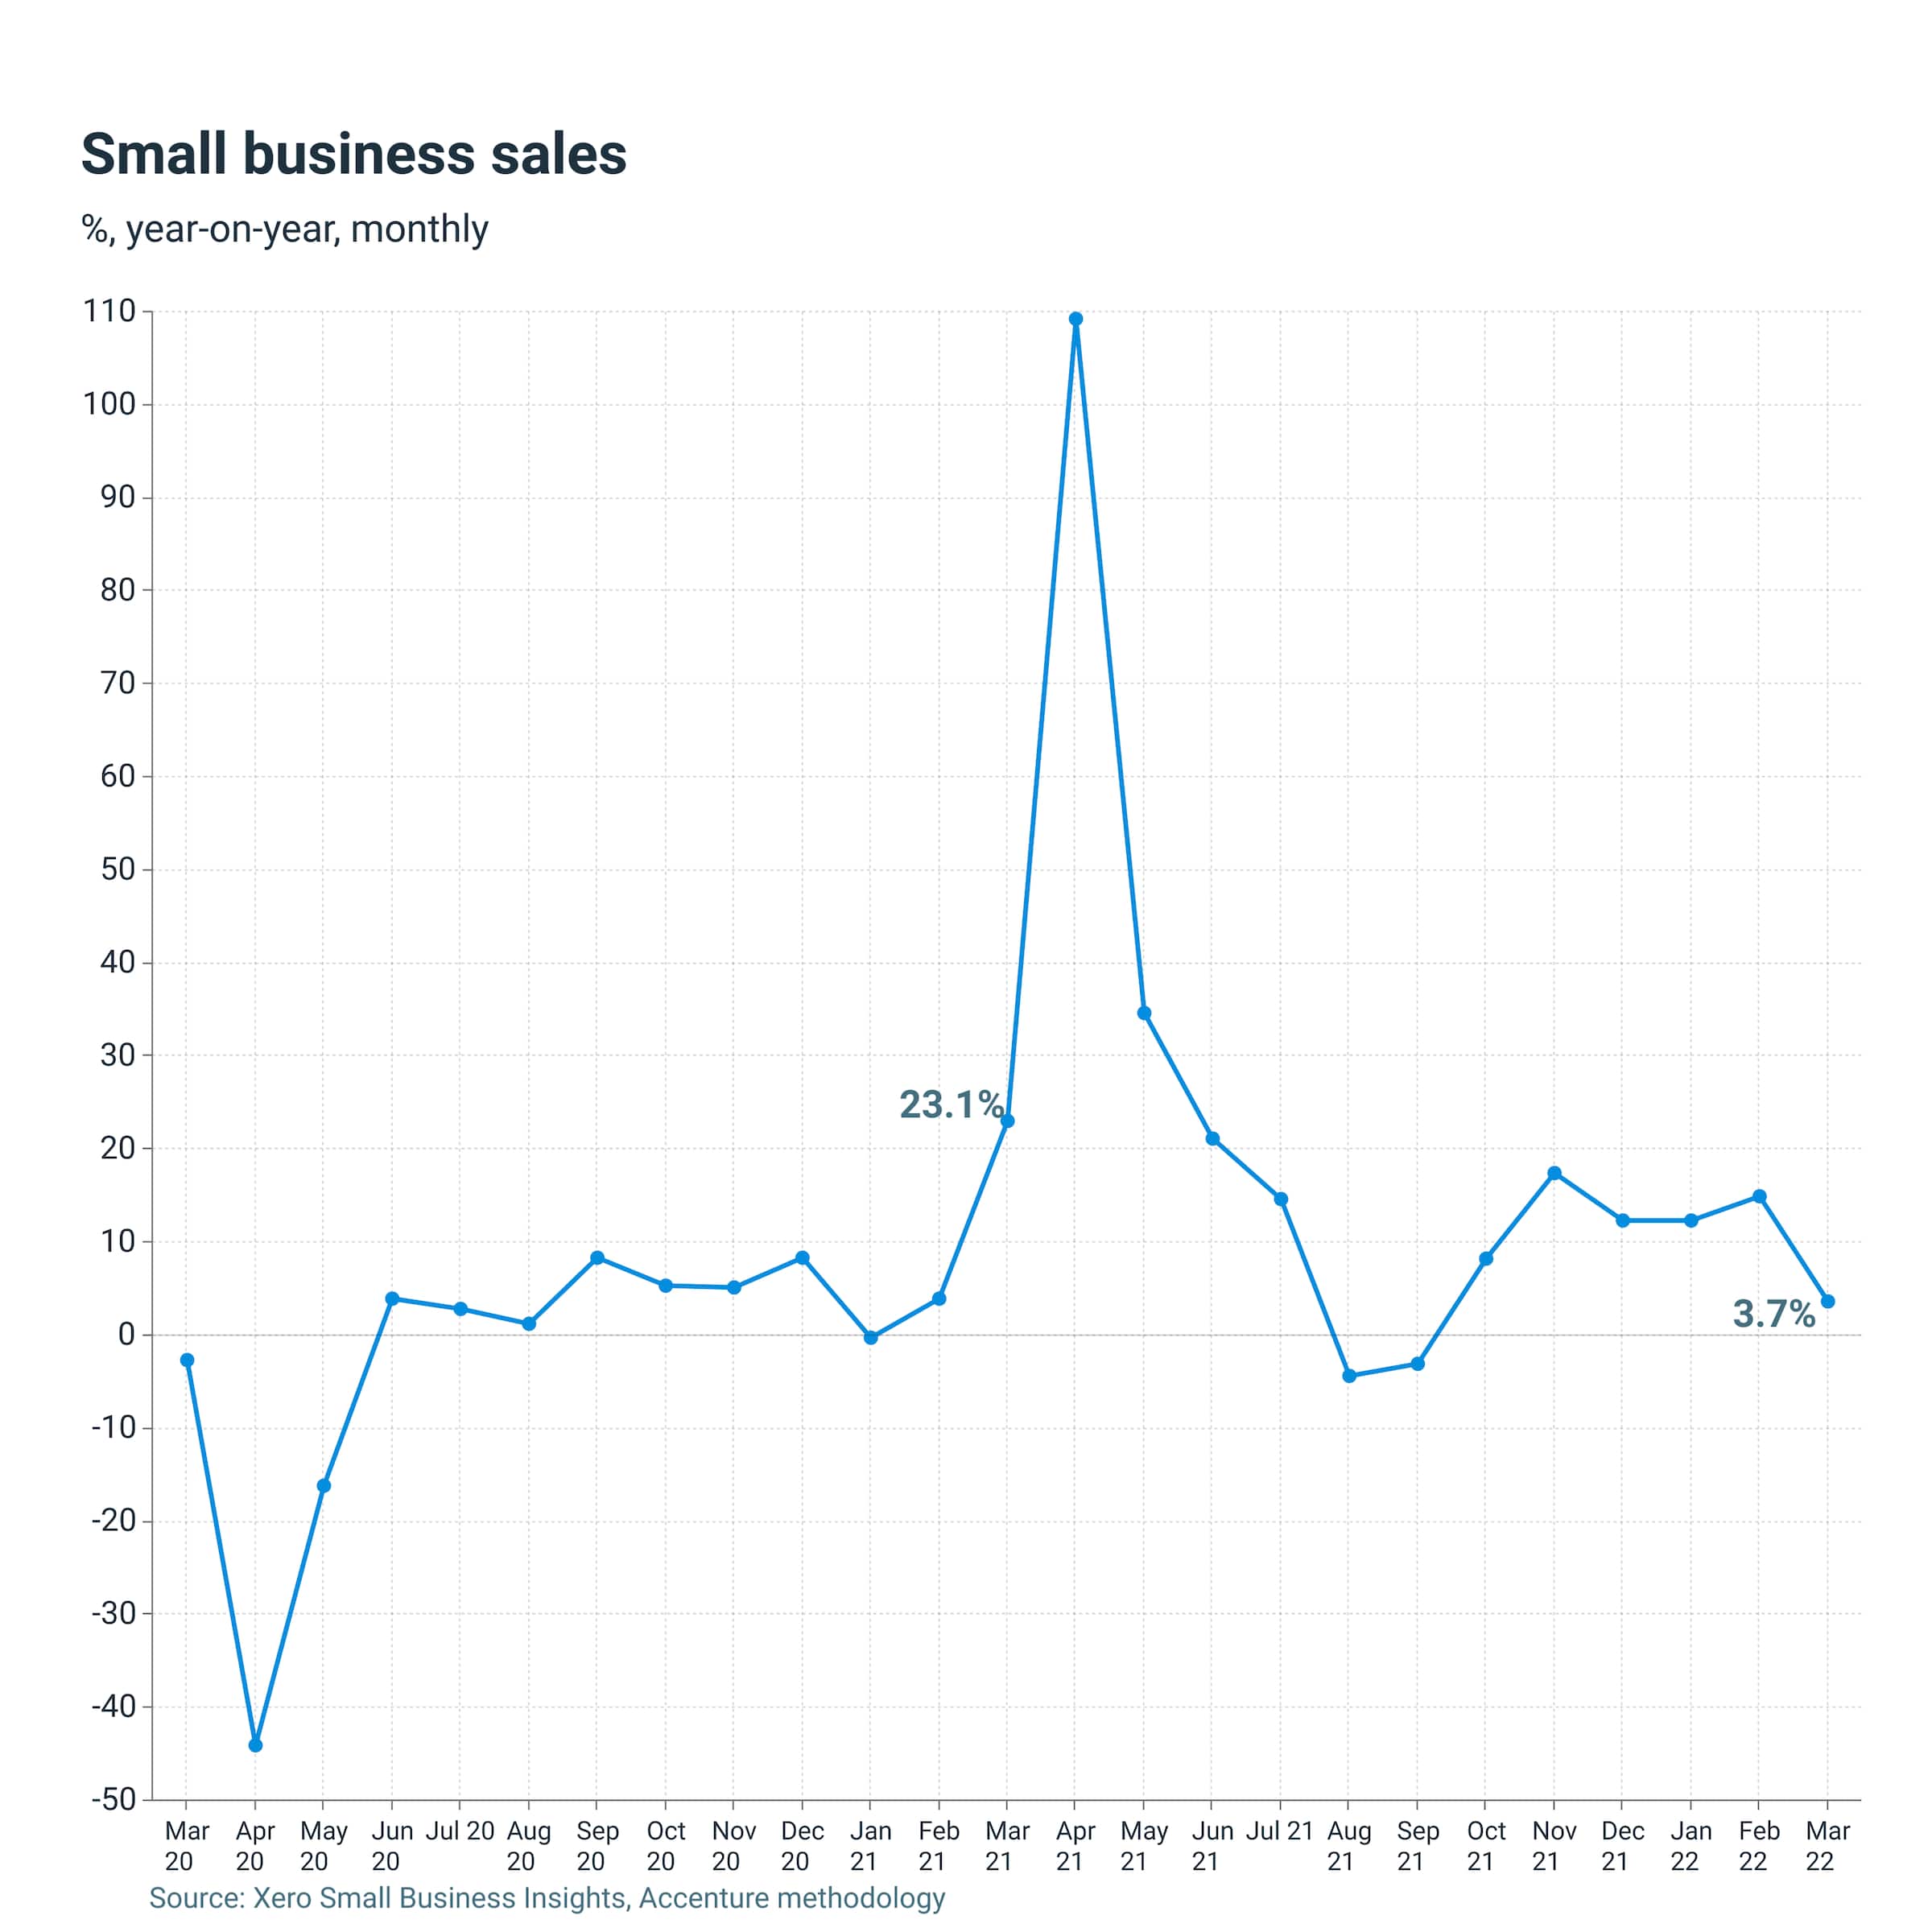 Graph shows NZ small business sales slowed to 3.7% year-on-year